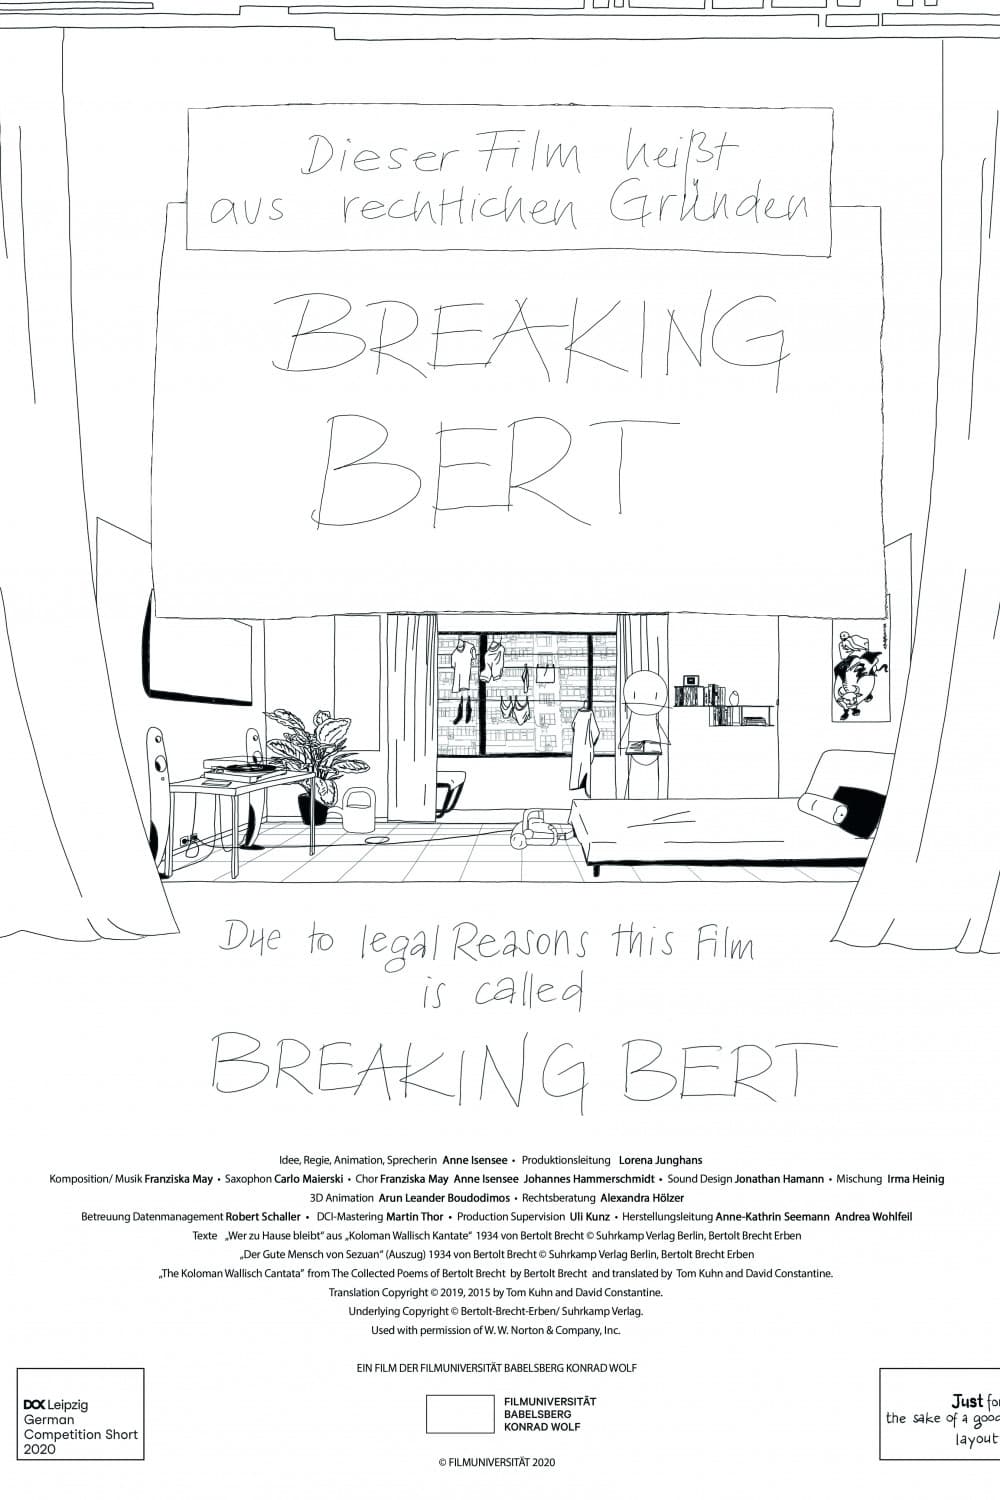 Due to Legal Reasons This Film is Called Breaking Bert